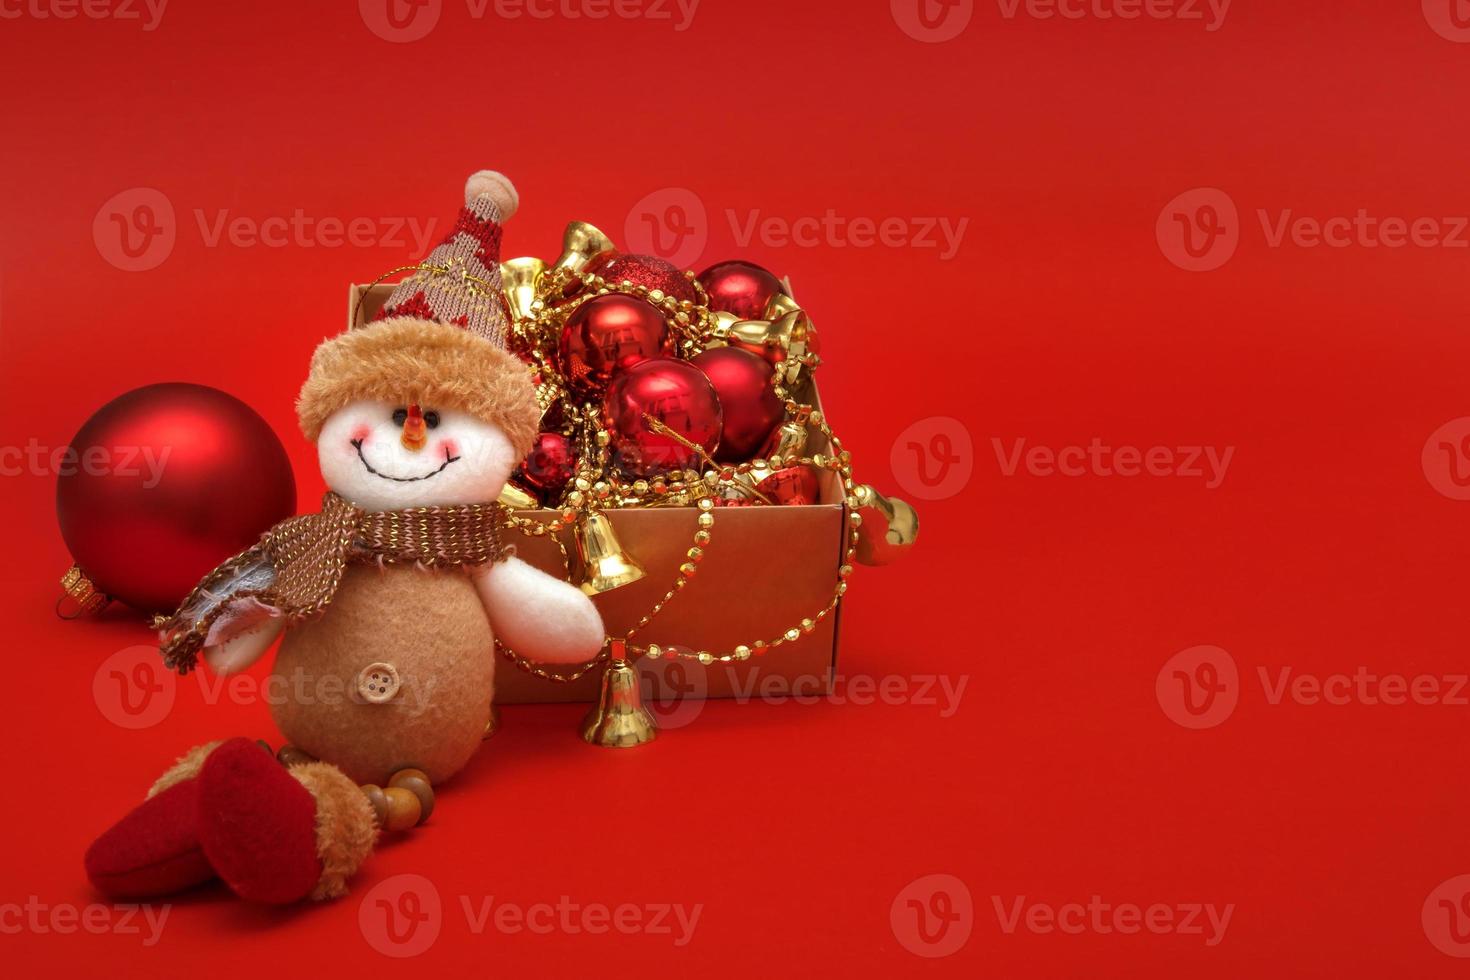 snowman next to Christmas balls and toys on a red background with copy space, Christmas card photo